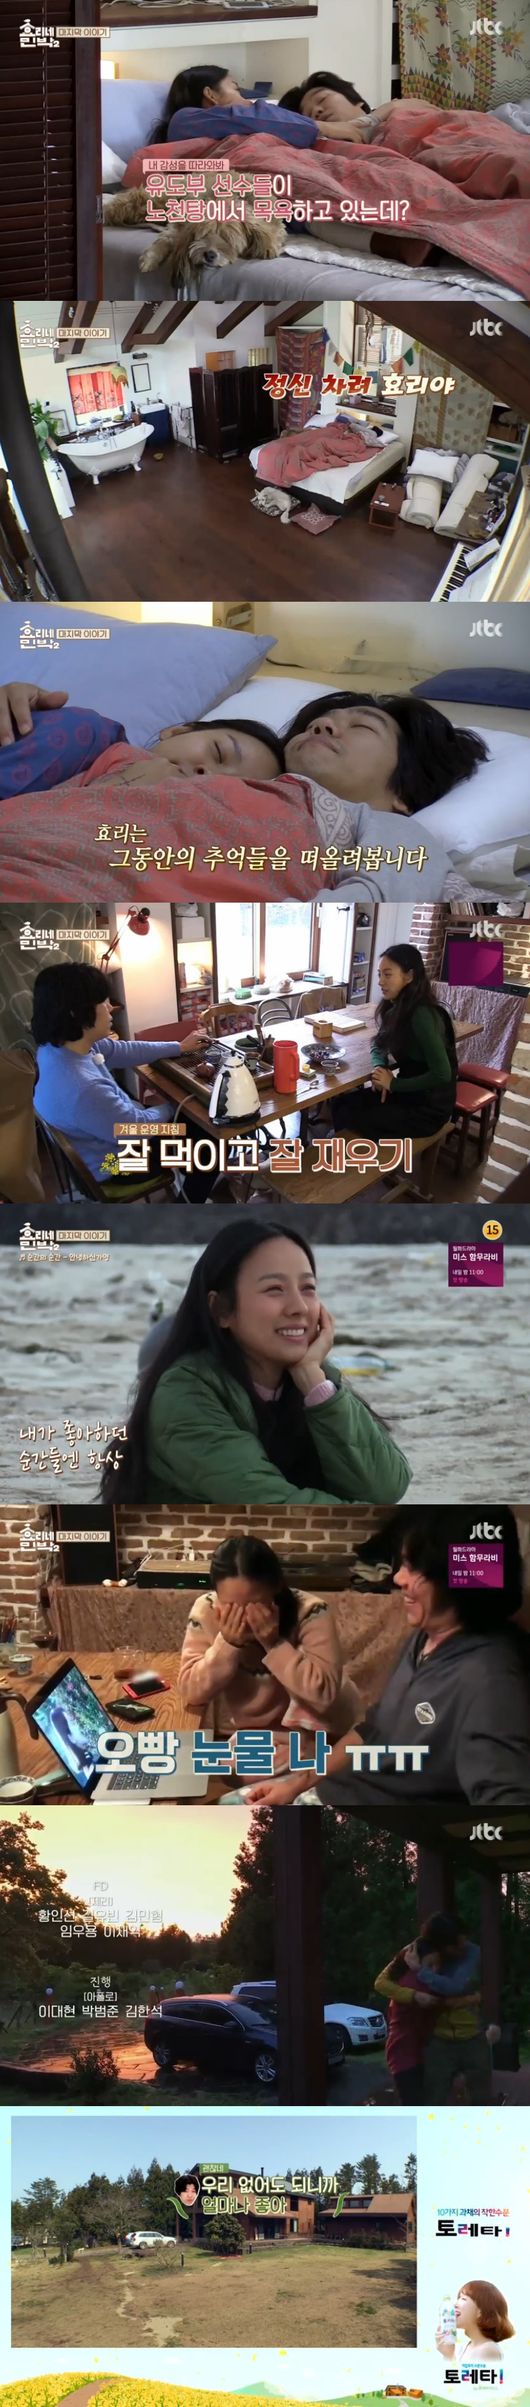 Season 2 was over, but Lee Hyori and Lee Sang Soon mentioned the season 3 at the end of the broadcast.The last story was told in JTBC entertainment Hyoriene Guest House Season 2 broadcast on the 20th.On this day, Hyori and Sang Soon lay down together in a couples bed for the first time since people left.Hyori, who leaned on Sang Soons arms, said, Even if people have gone, there is no way to see it. There is a makeup of the well and Jinsol is cleaning up.So Sang Soon said, I will be sane, but I called it Bogsam in the air and laughed at the aftereffects.He had to remember the past, and he had to make sure that he was so lucky.First, the first meeting between Hyori and Im Yoon-ah, whom they met in nearly a decade, was drawn, especially by the breakfast master Im Yoon-ah, who was on the table of guests every morning.I could not miss the waffle, which is a pine nut, kimbap, handmade rain and signature menu.Im Yoon-ah, who had purchased waffle machines directly from Seoul before coming to the rice bowl, was born with such a waffle.In fact, it was Im Yoon-ah who did not do anything from the beginning.It was Im Yoon-ah, who had cleaned the cleaner head from the head to the cleaner, and had done the civilian therapy to restore the induction as well as the blocked toilet.It was Im Yoon-ah with the best conditions of part-time job.Im Yoon-ah filled the vacancy to the point that even when Lee Hyori was sick, he said, I just need Im Yoon-ah.The first appearance of Park Bo-gum, a strange thing, was also drawn. The guests admired the sword, which had been straight since the first meeting, saying, It was like a fairy, a fairy, a fairy.It was a bogus that not only got up early in the morning and made rice cake soup, but also enjoyed the open-air bath with the guests and was well-converged with Guest housegoers.The guests did not forget the sword, saying, I was so comfortable, I was so grateful.Guests also called him the icon of Heart, saying, Park Bo-gum is a treasure of the nation, your greatness.The Boss was a universal man who could not do anything.Not only did I find the Guest house work that I did not do, but also the moments when everyone was fascinated by the appearance of the sword, which presents the piano melody in winter night, and sings with peaceful melody.Hyori praised the two deer chemistry, saying, Im Yoon-ah is not able to do anything and the sword is good.After three months of long journey, the winter - spring business, which was season 2, was also terminated.In the regret of all, the end of the broadcast and Hyori suggested Lets change to Hotel rather than Guest house and Lets go to unmanned tell and gave open expectation to season 3.Hyoriene Guest House Season 2 captures the broadcast screen